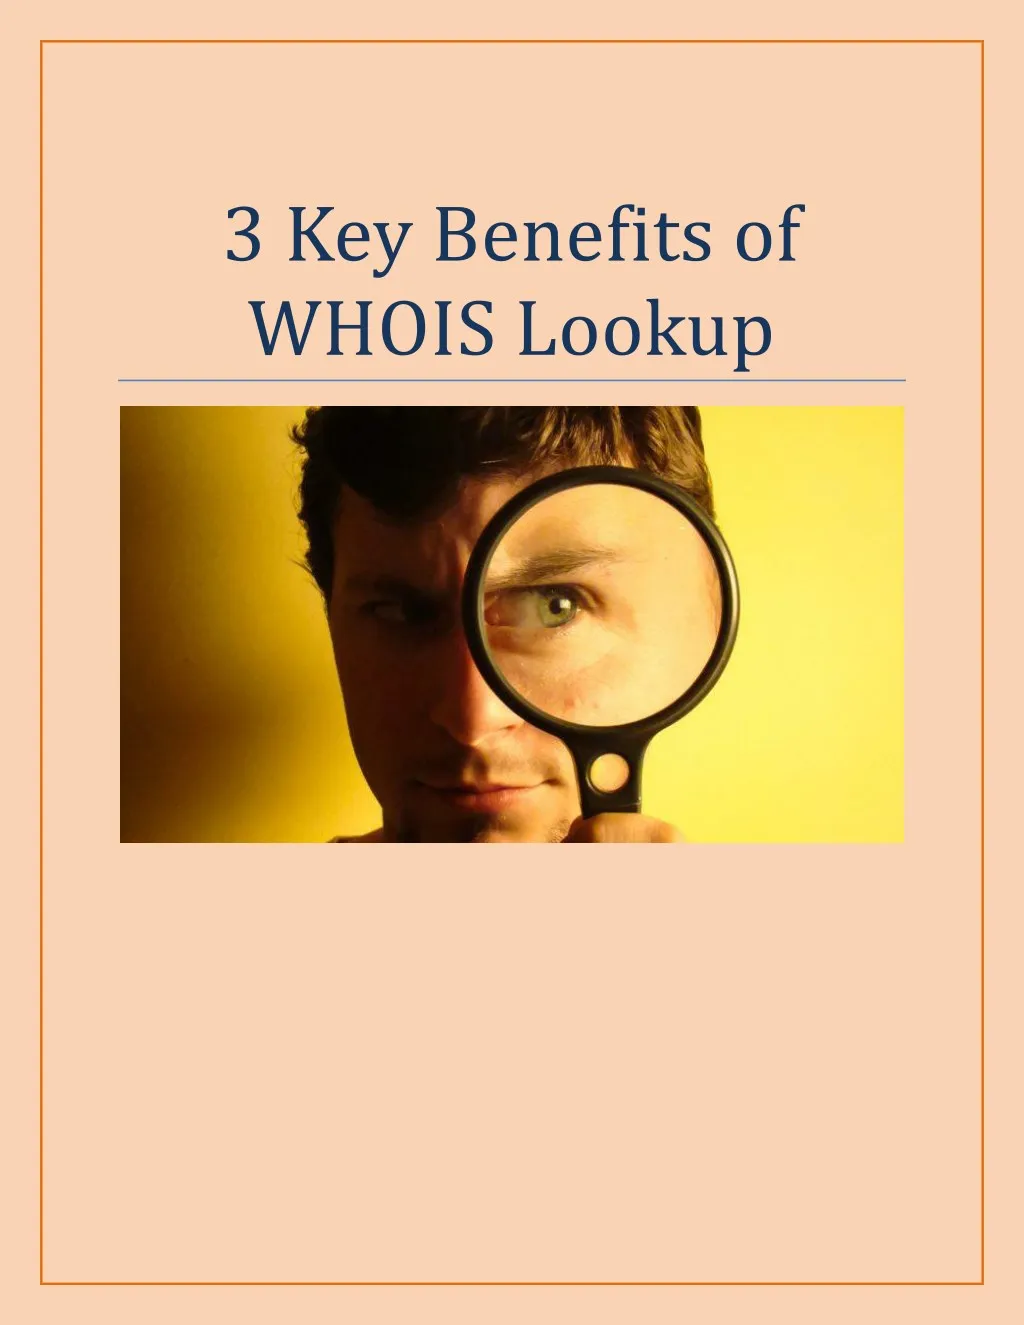 3 key benefits of whois lookup